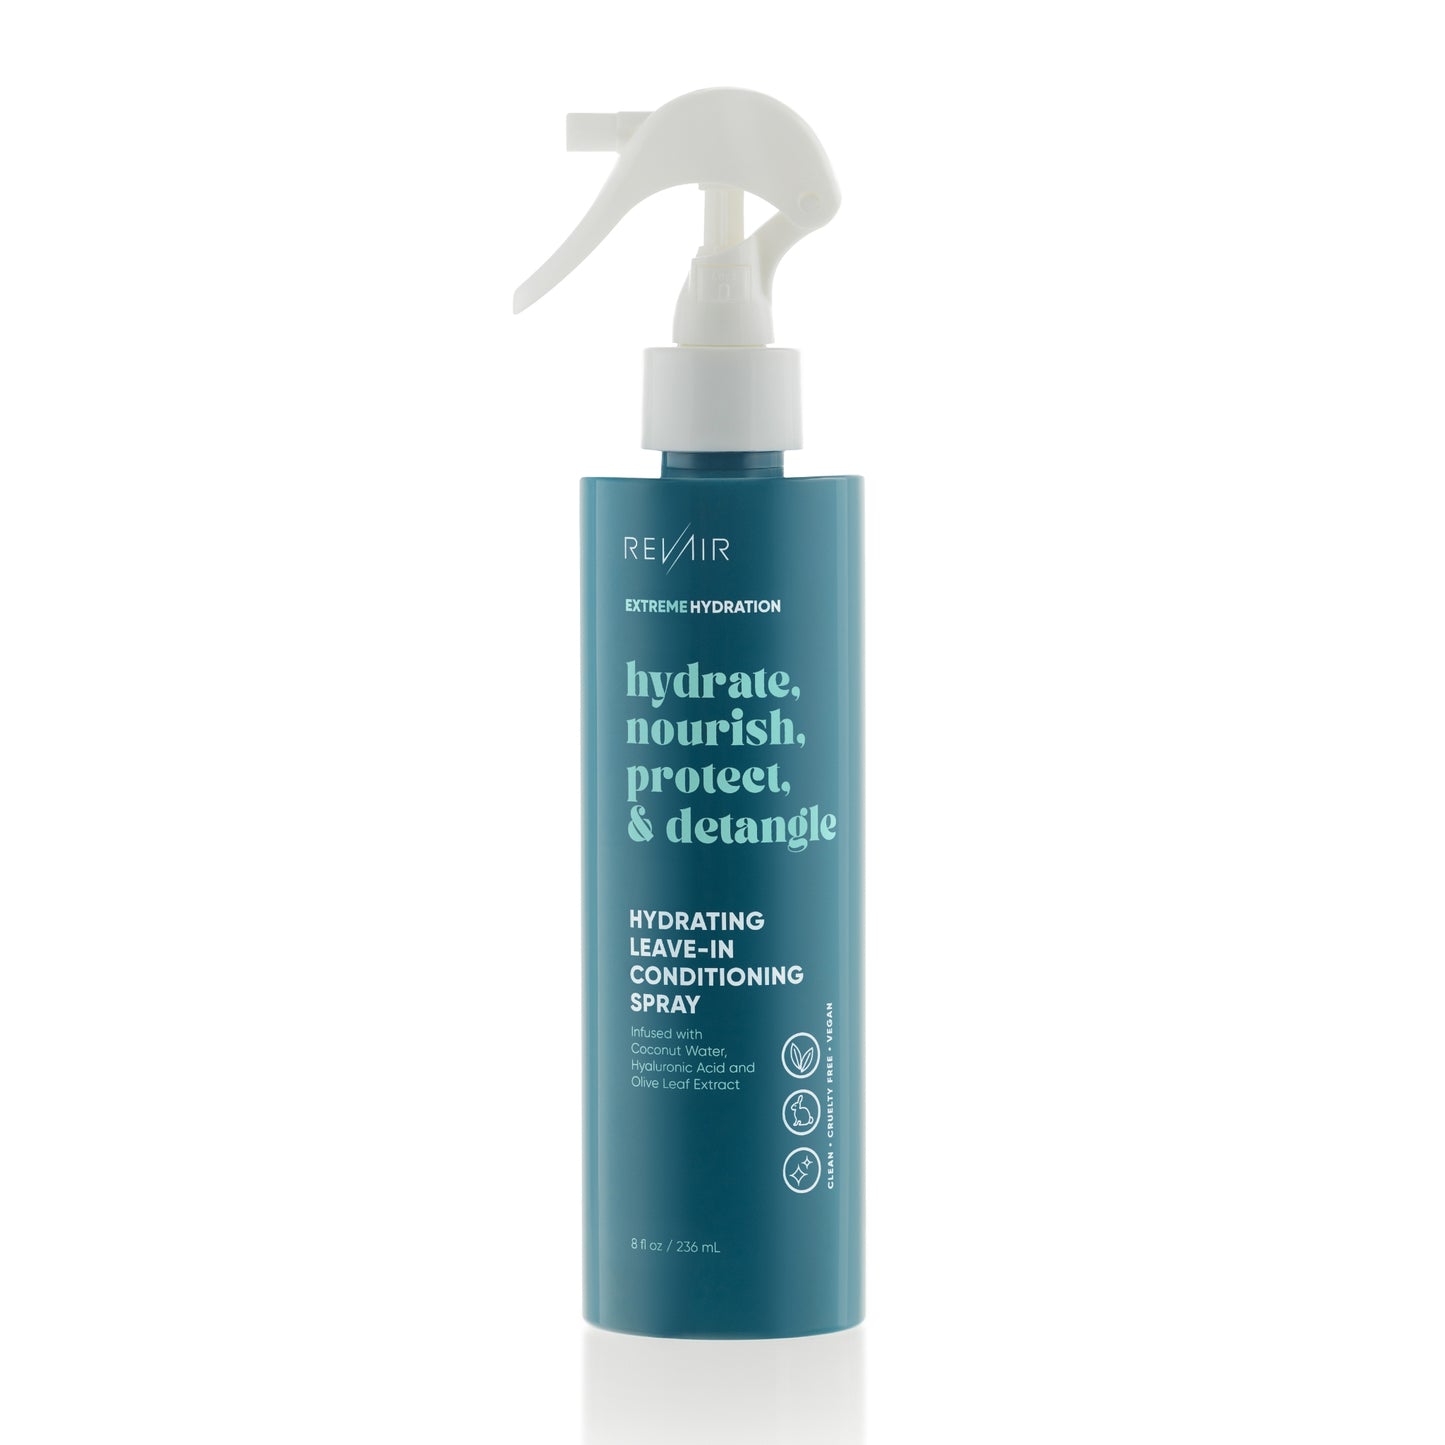 Hydrating Leave-In Conditioning Spray (8 oz)